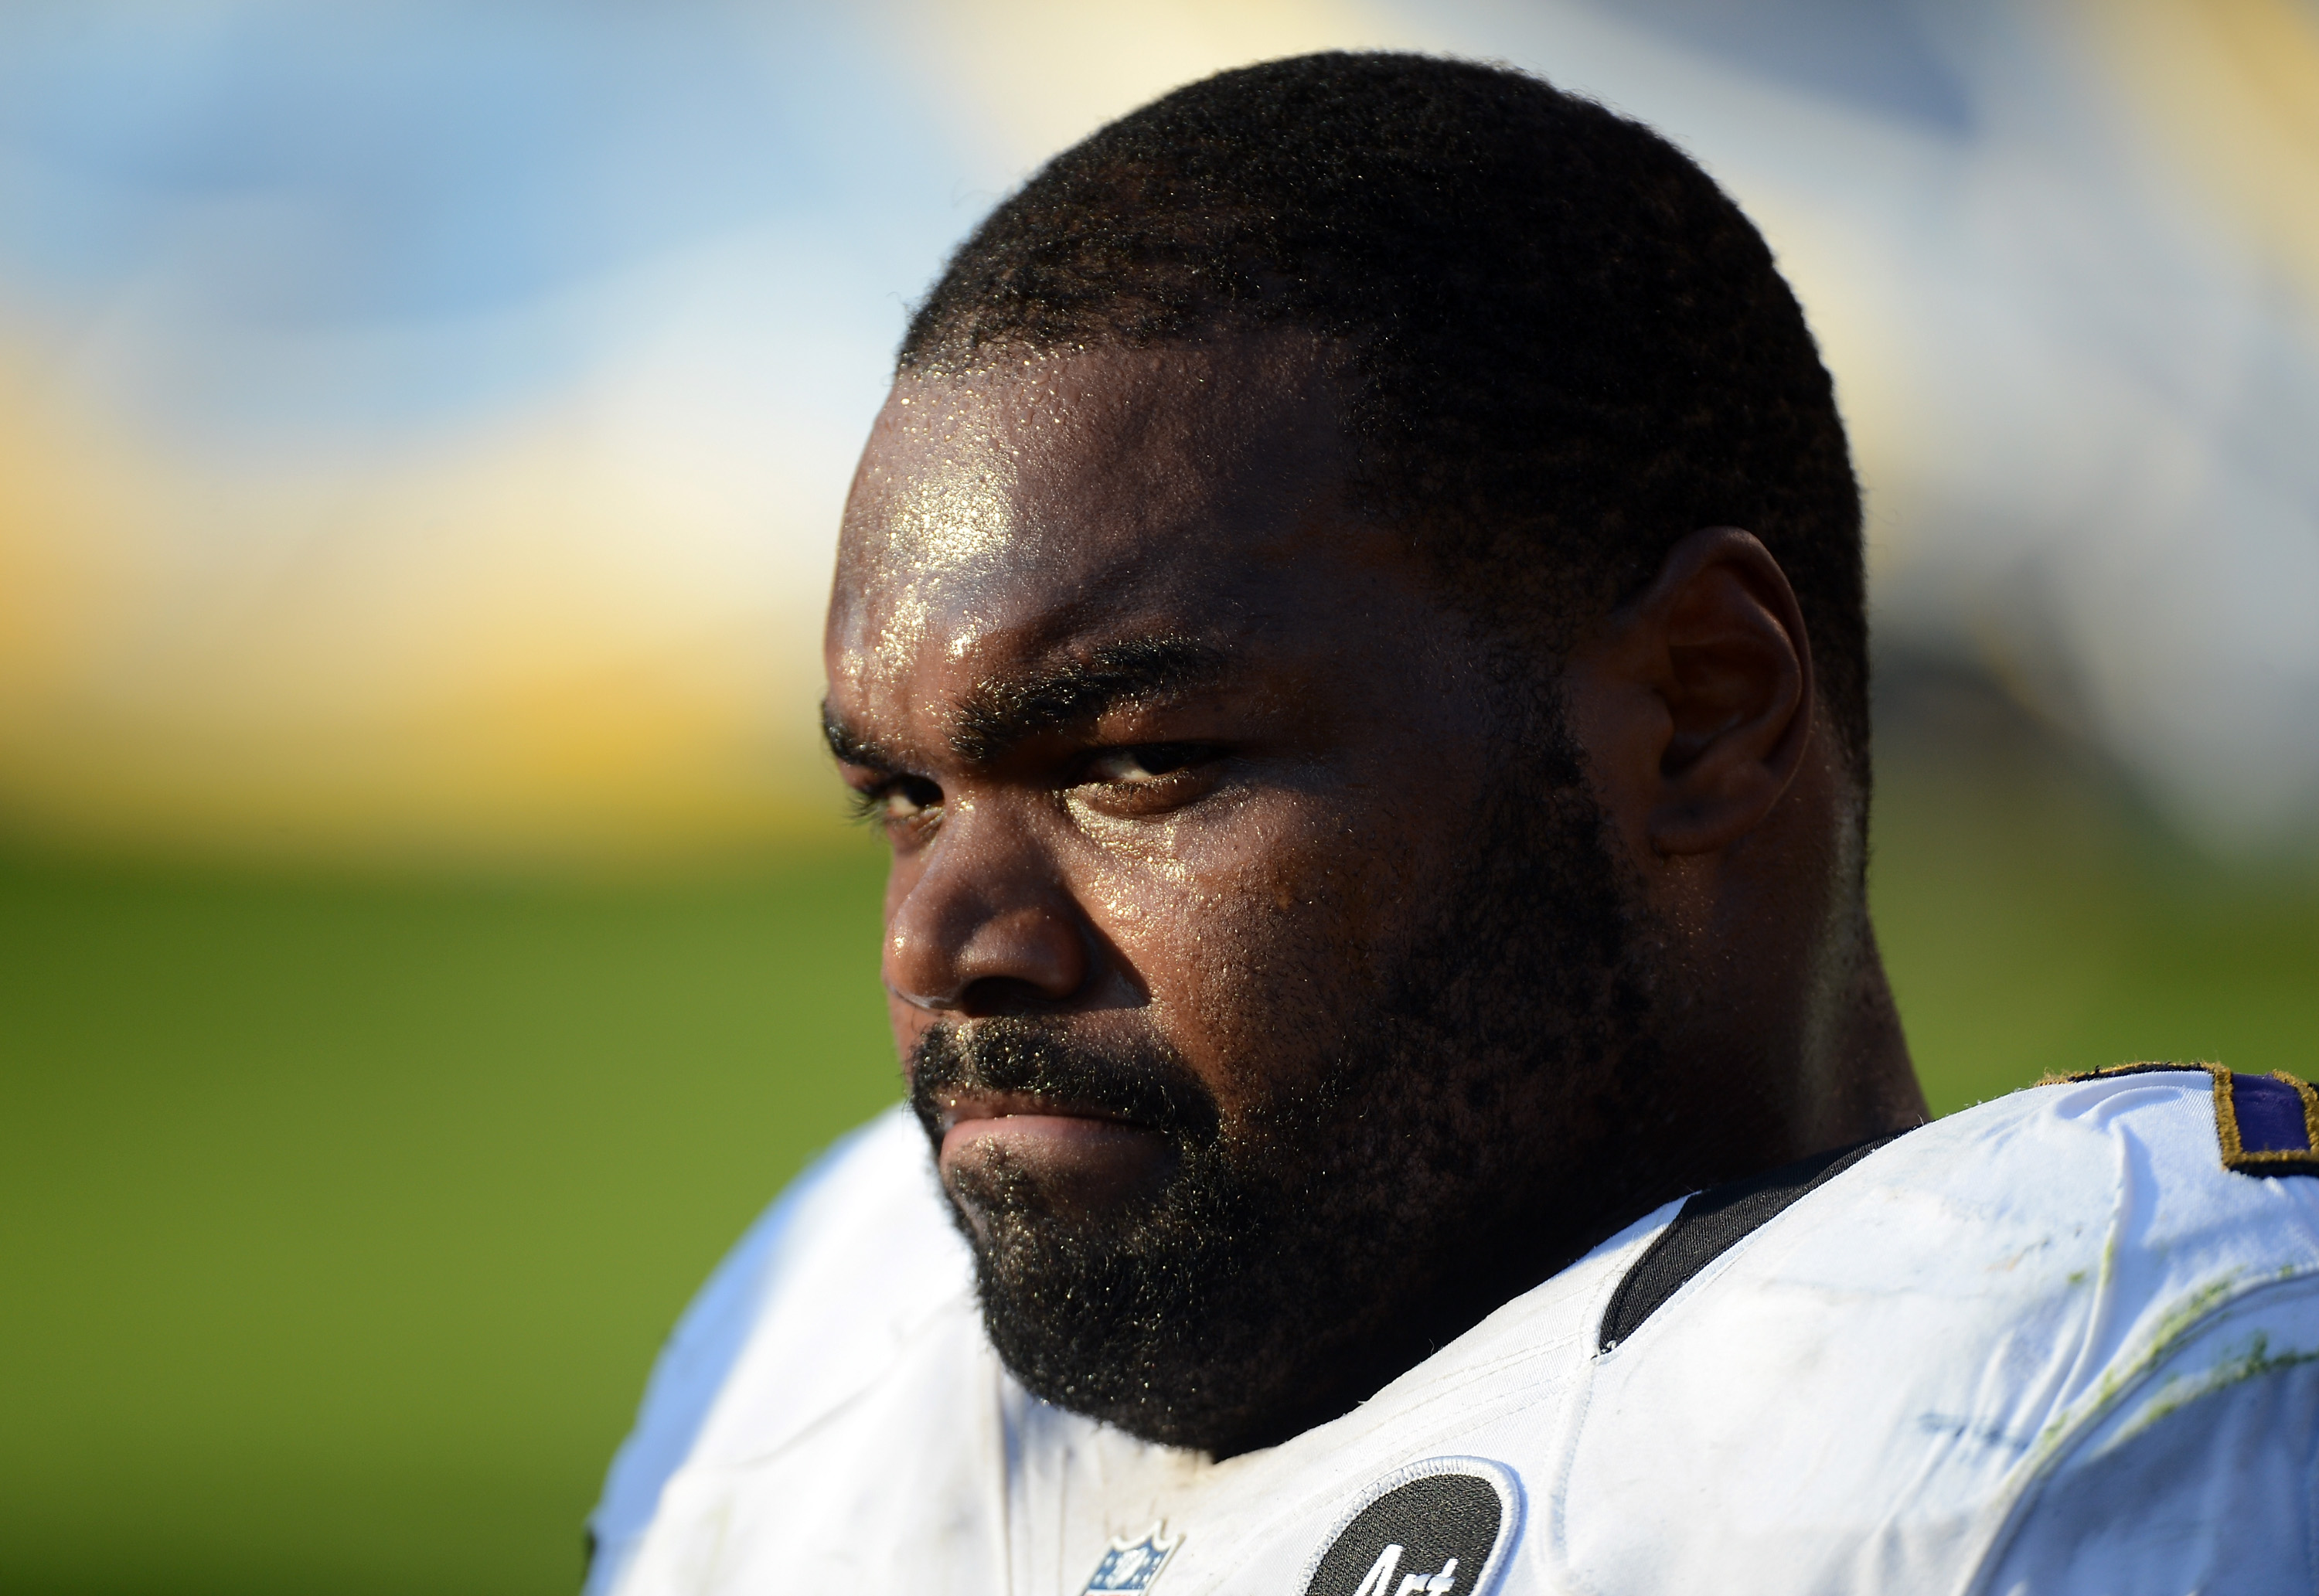 Michael Oher's conservatorship with Tuohy family ends – NBC 7 San Diego